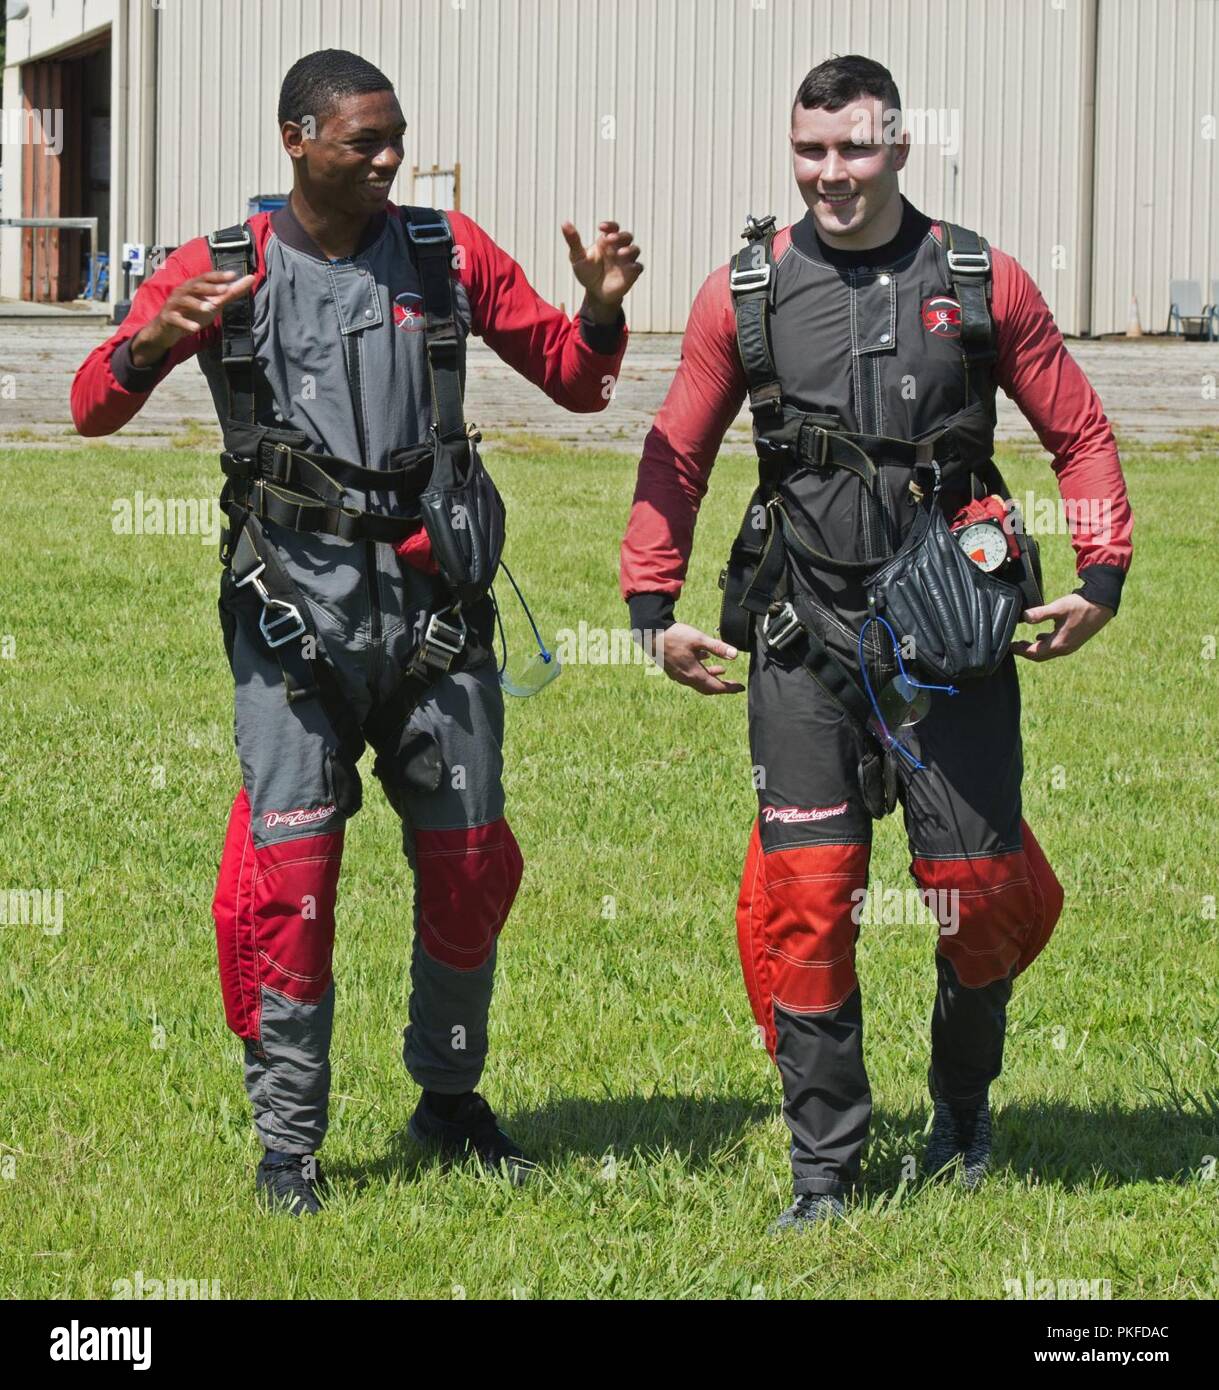 U.S. Air Force Airman 1st Class Gabriel Ford, left, and Airman 1st Class Tyler Sims, 20th Equipment Maintenance Squadron stock pile management crew chiefs, discuss their experiences following a “leap of faith” skydiving event in Chester, S.C., Aug. 11, 2018. There are three steps that prepare Airmen to take the leap of faith which are: doing homework, facing obstacles or fears and not going through things alone. Stock Photo